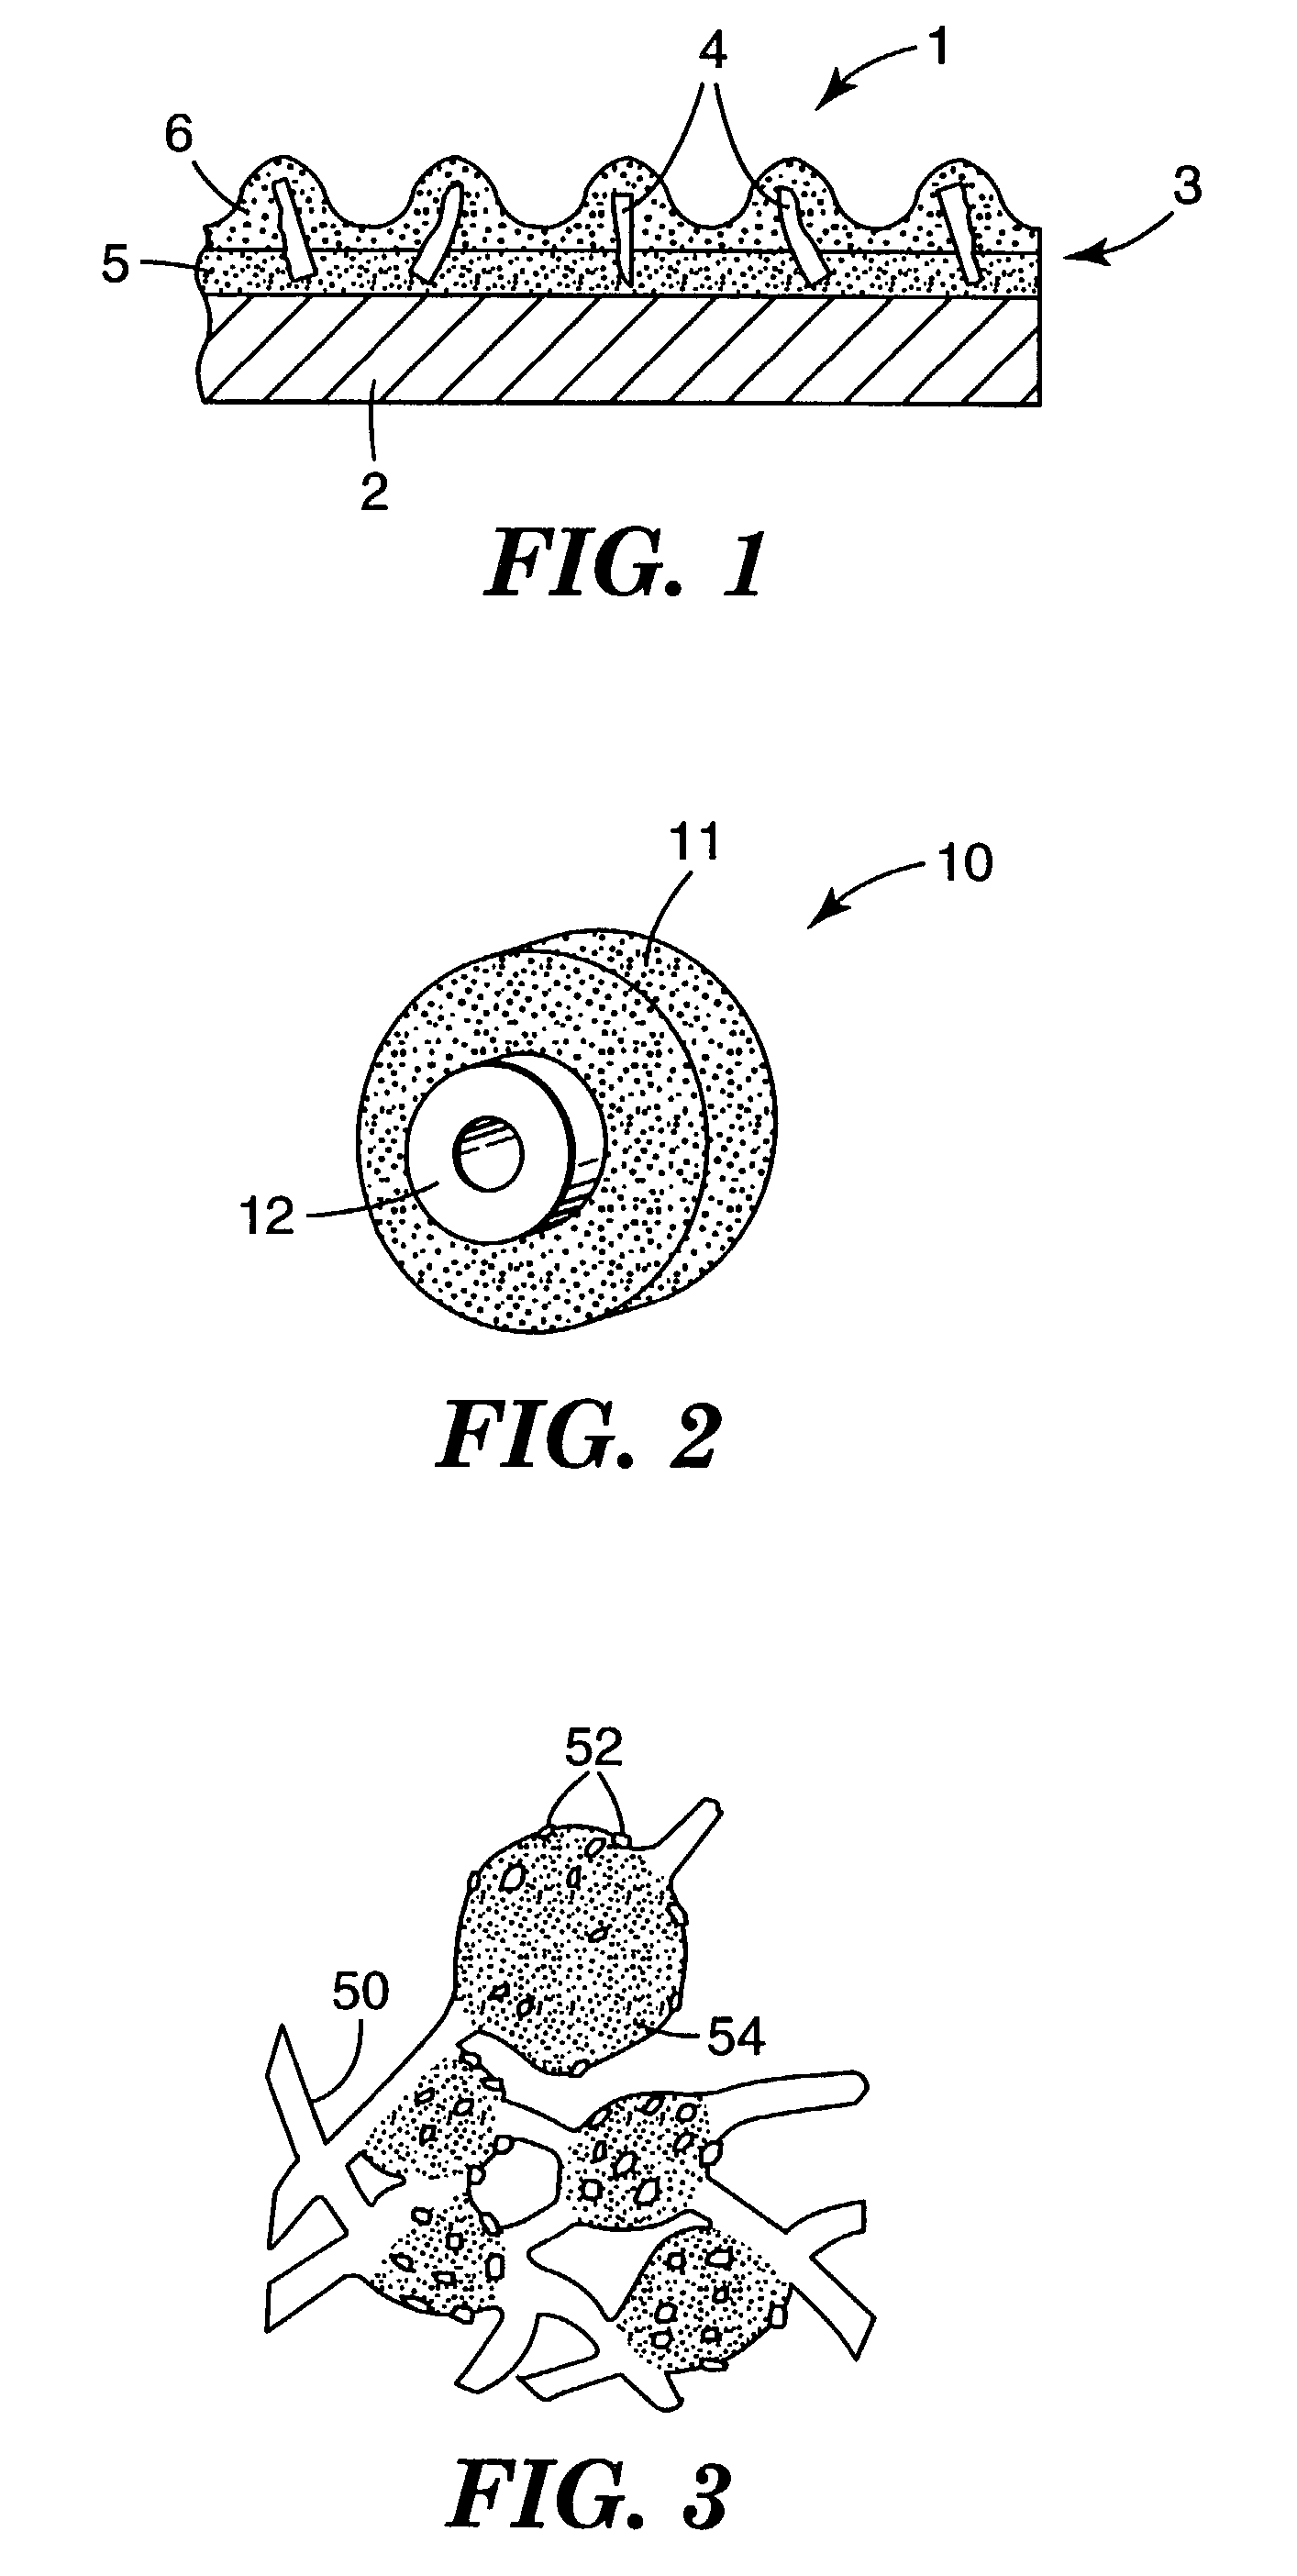 Abrasive particles and methods of making and using the same